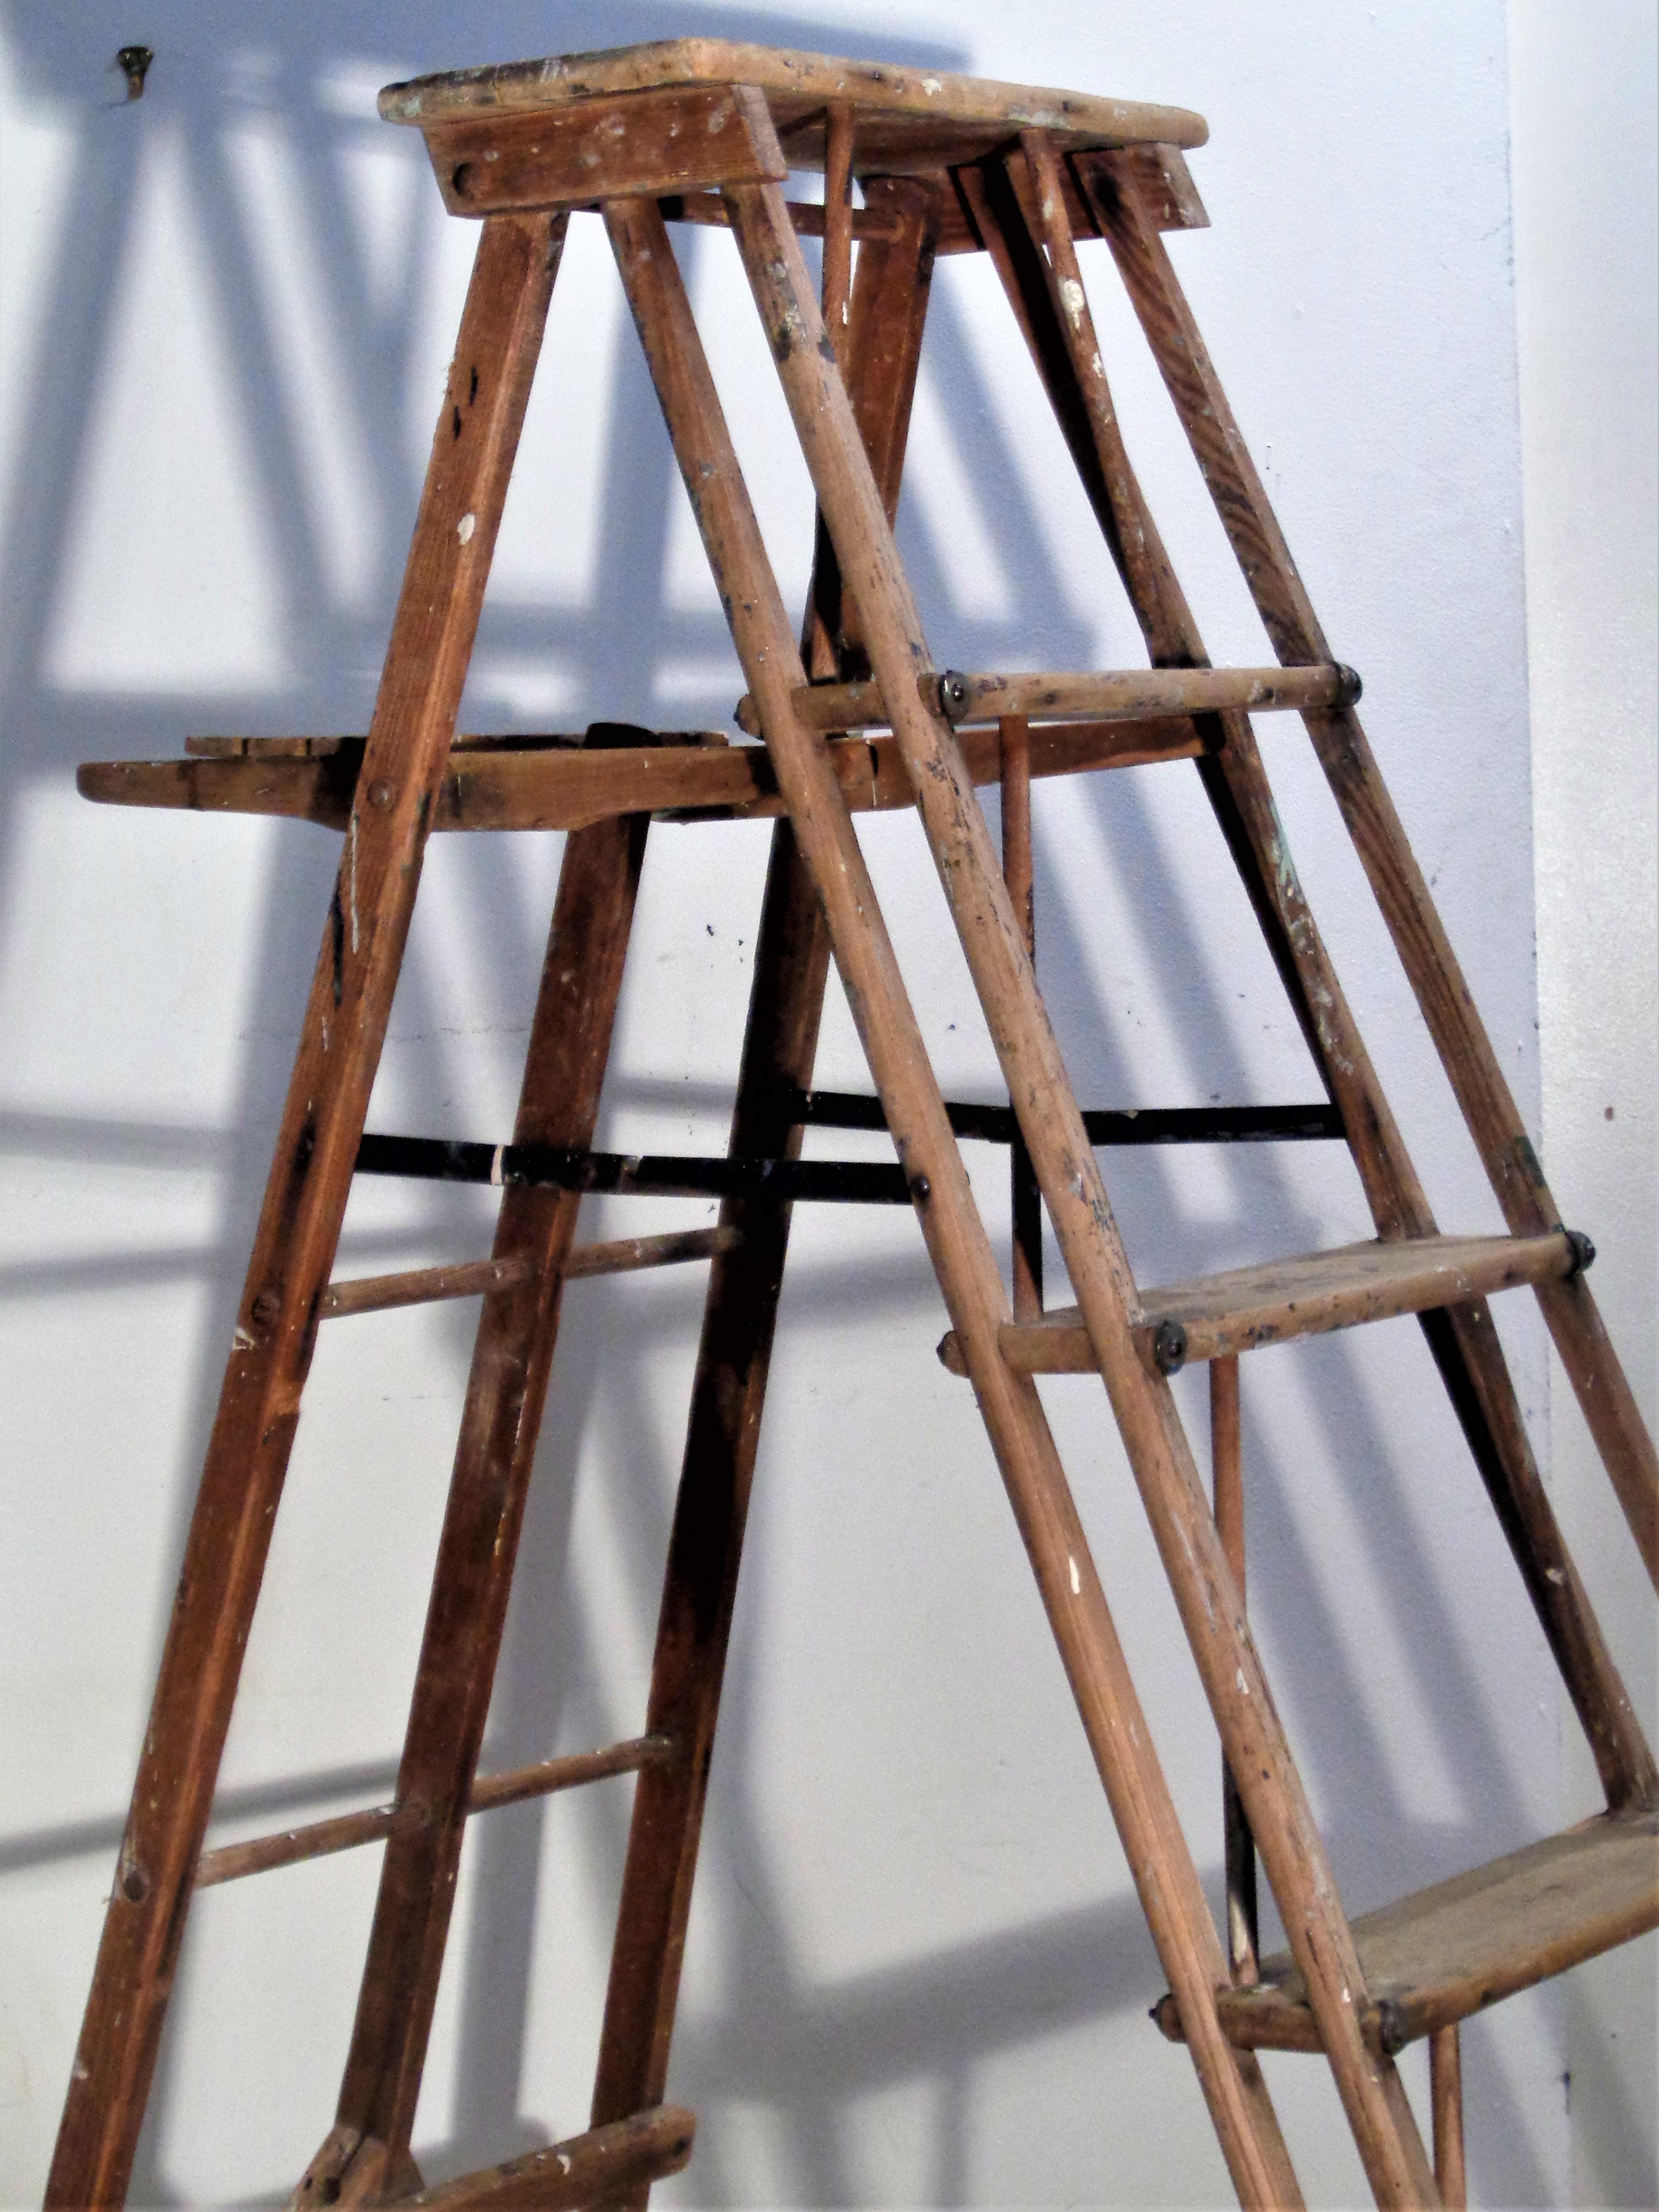 American Industrial painter's / utility work ladder with beautifully designed architectonic form and great old color to wood and metal construction. In fully open working position as shown in pictures - measures 56